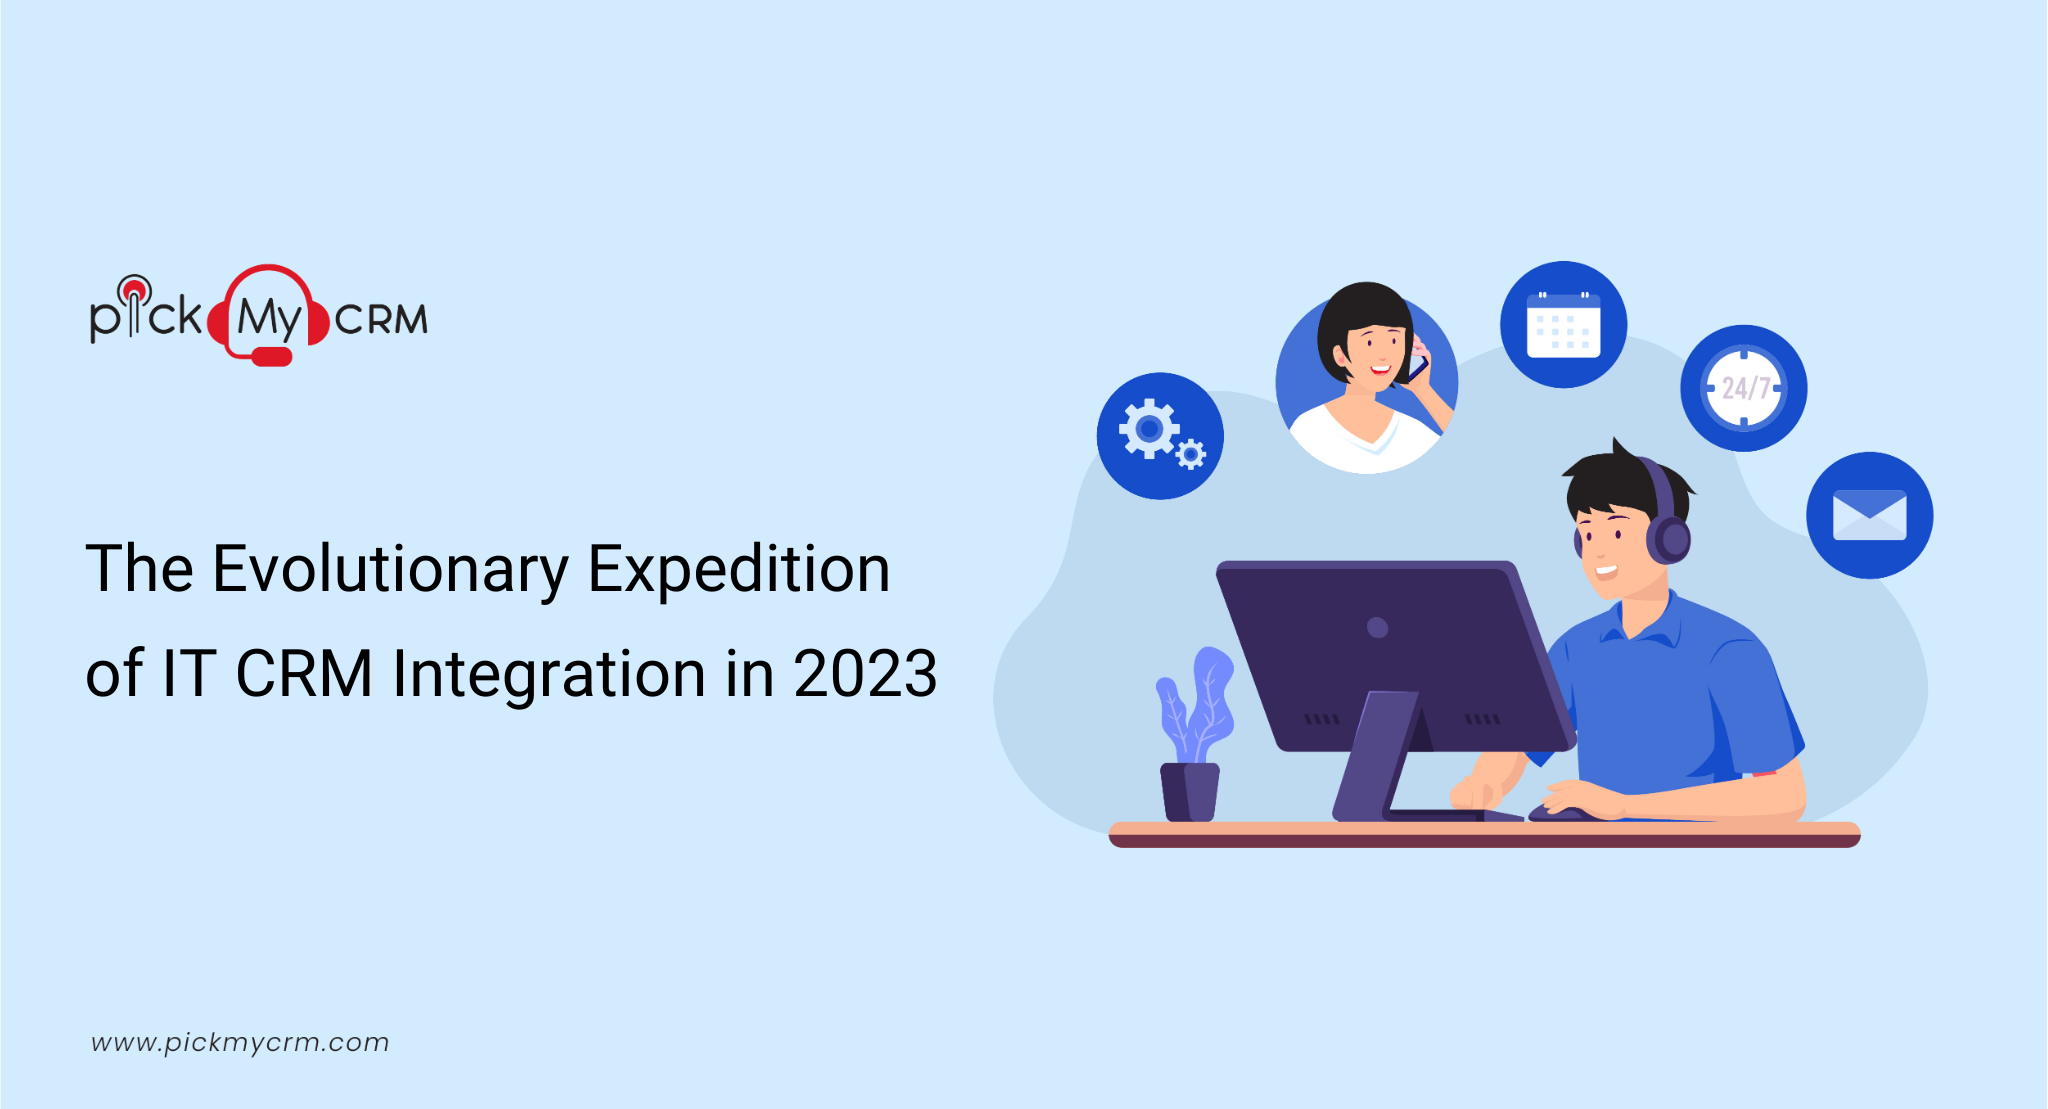 The Evolutionary Expedition of IT CRM Integration in 2023